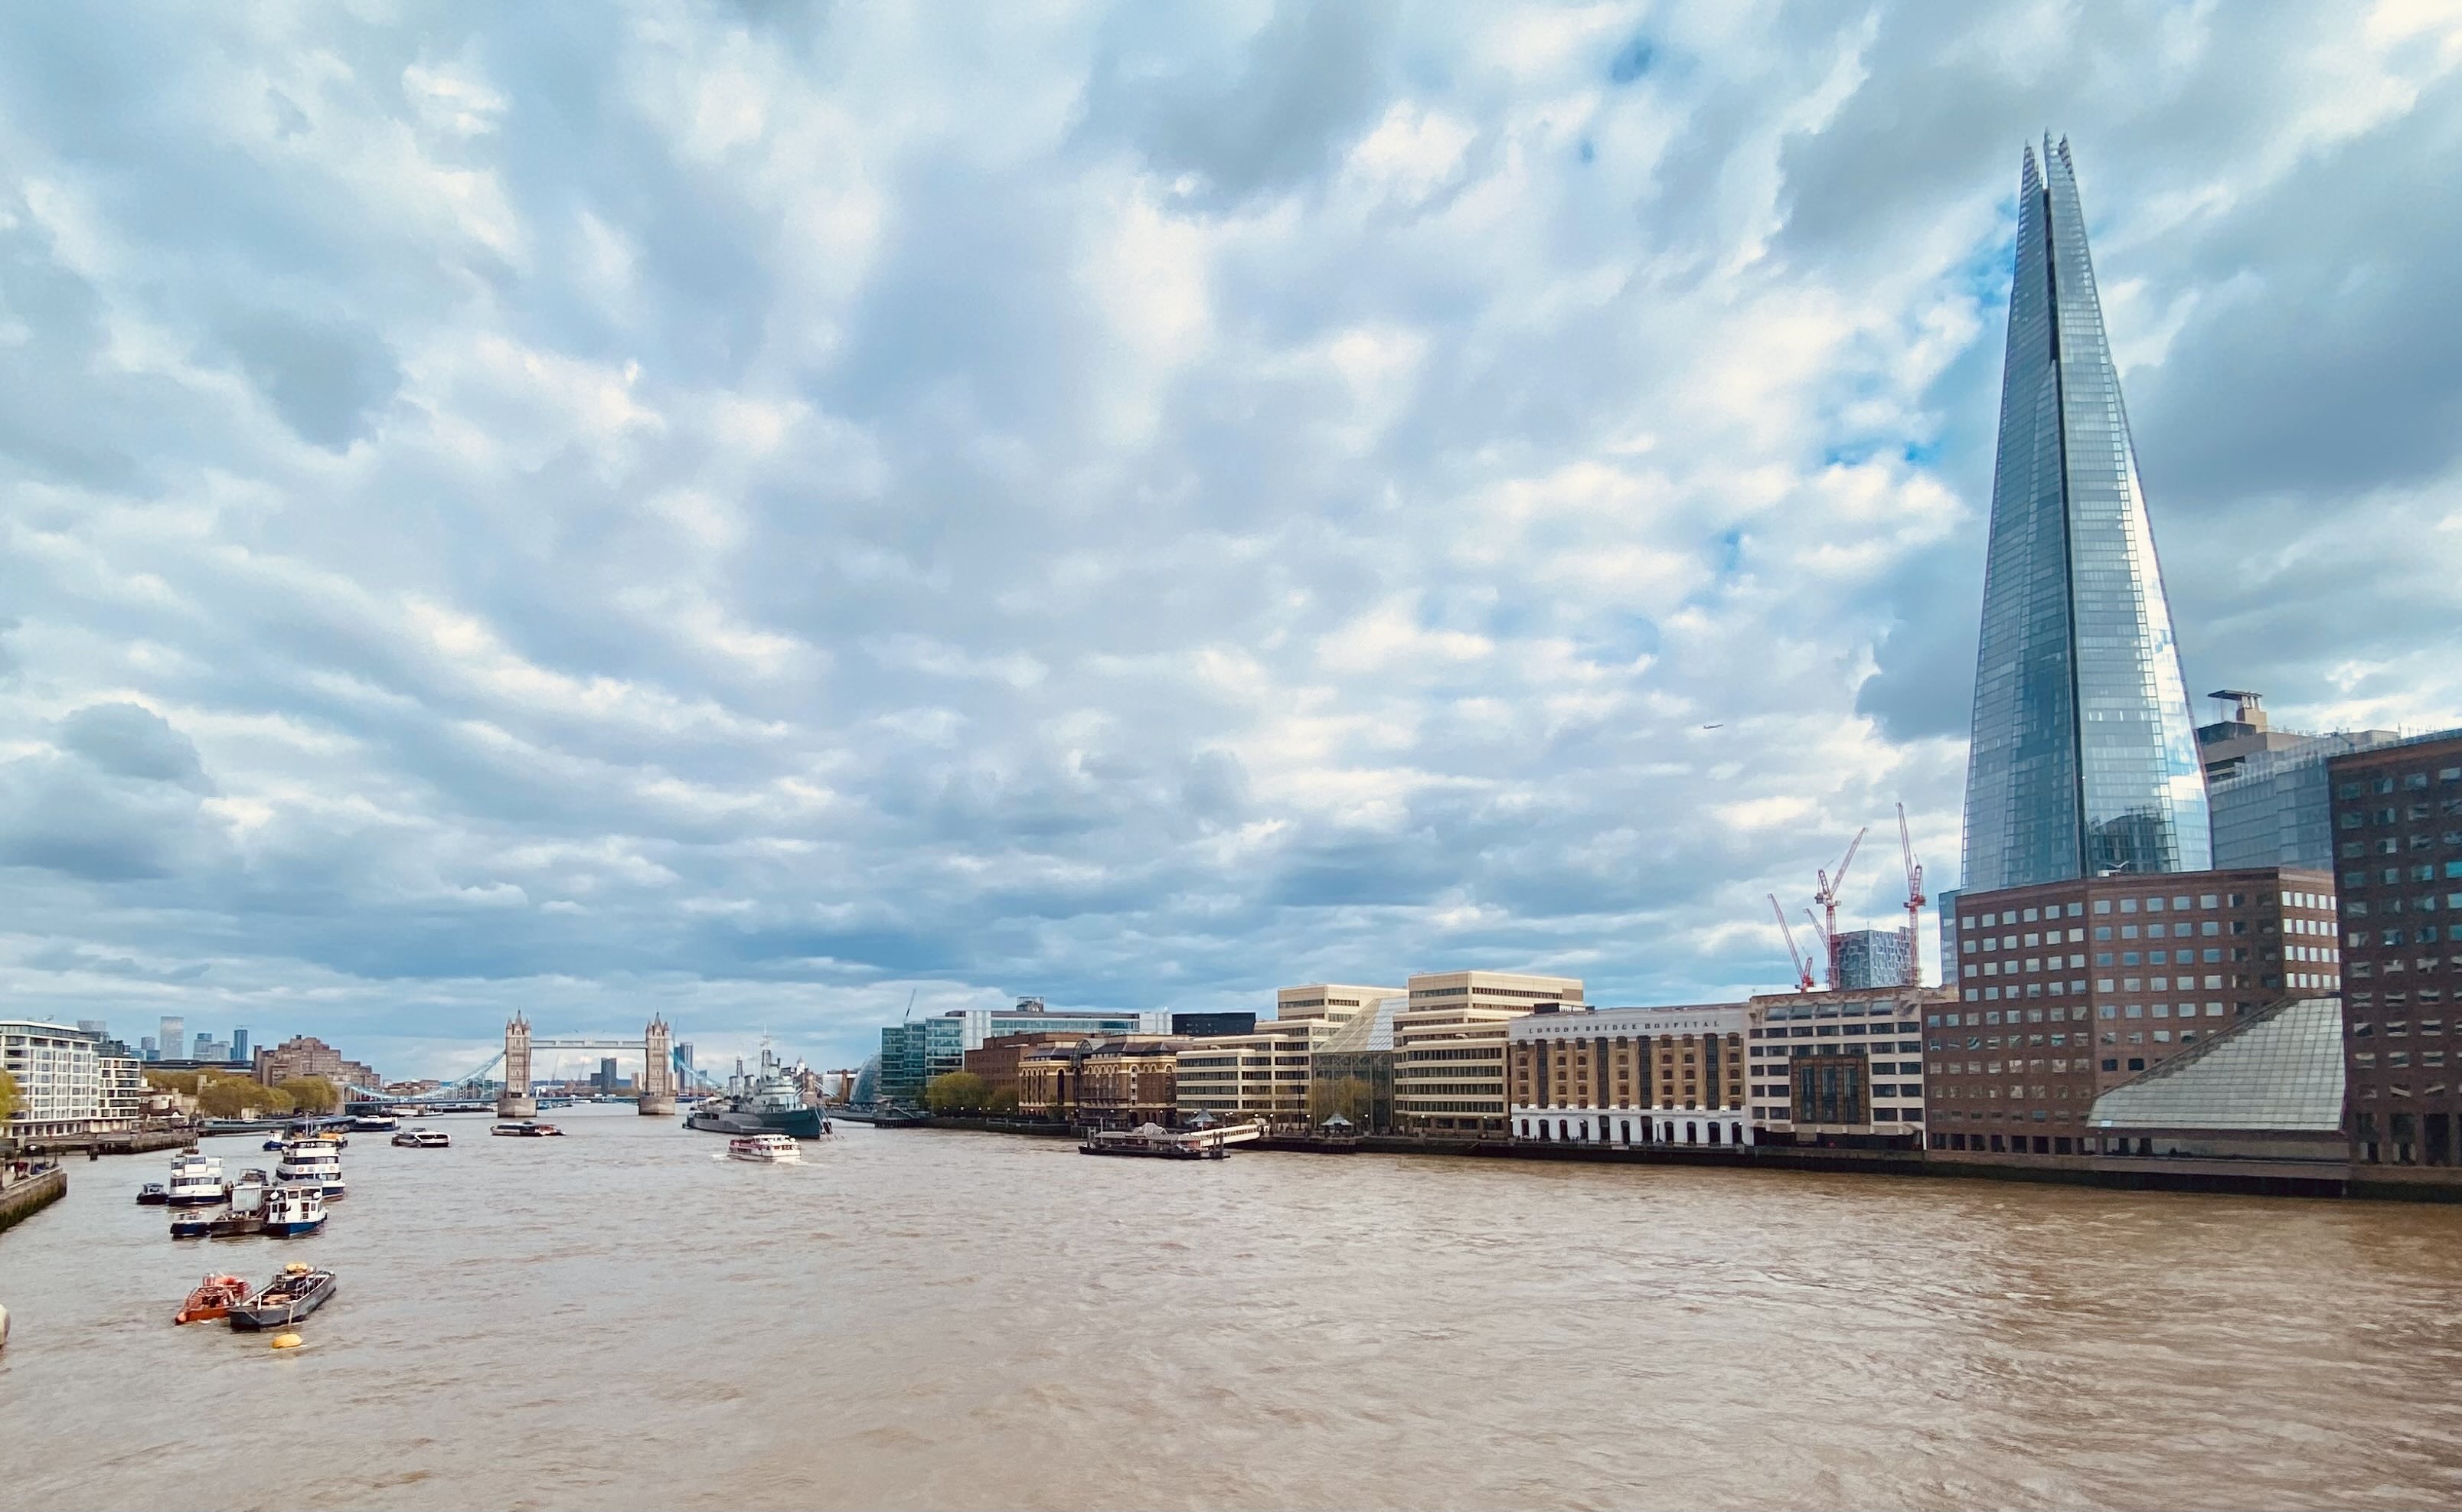 The view from London Bridge. A huge cloudy sky stretches out over the river below. The Shard can be seen on the right and Tower Bridge in the distance.